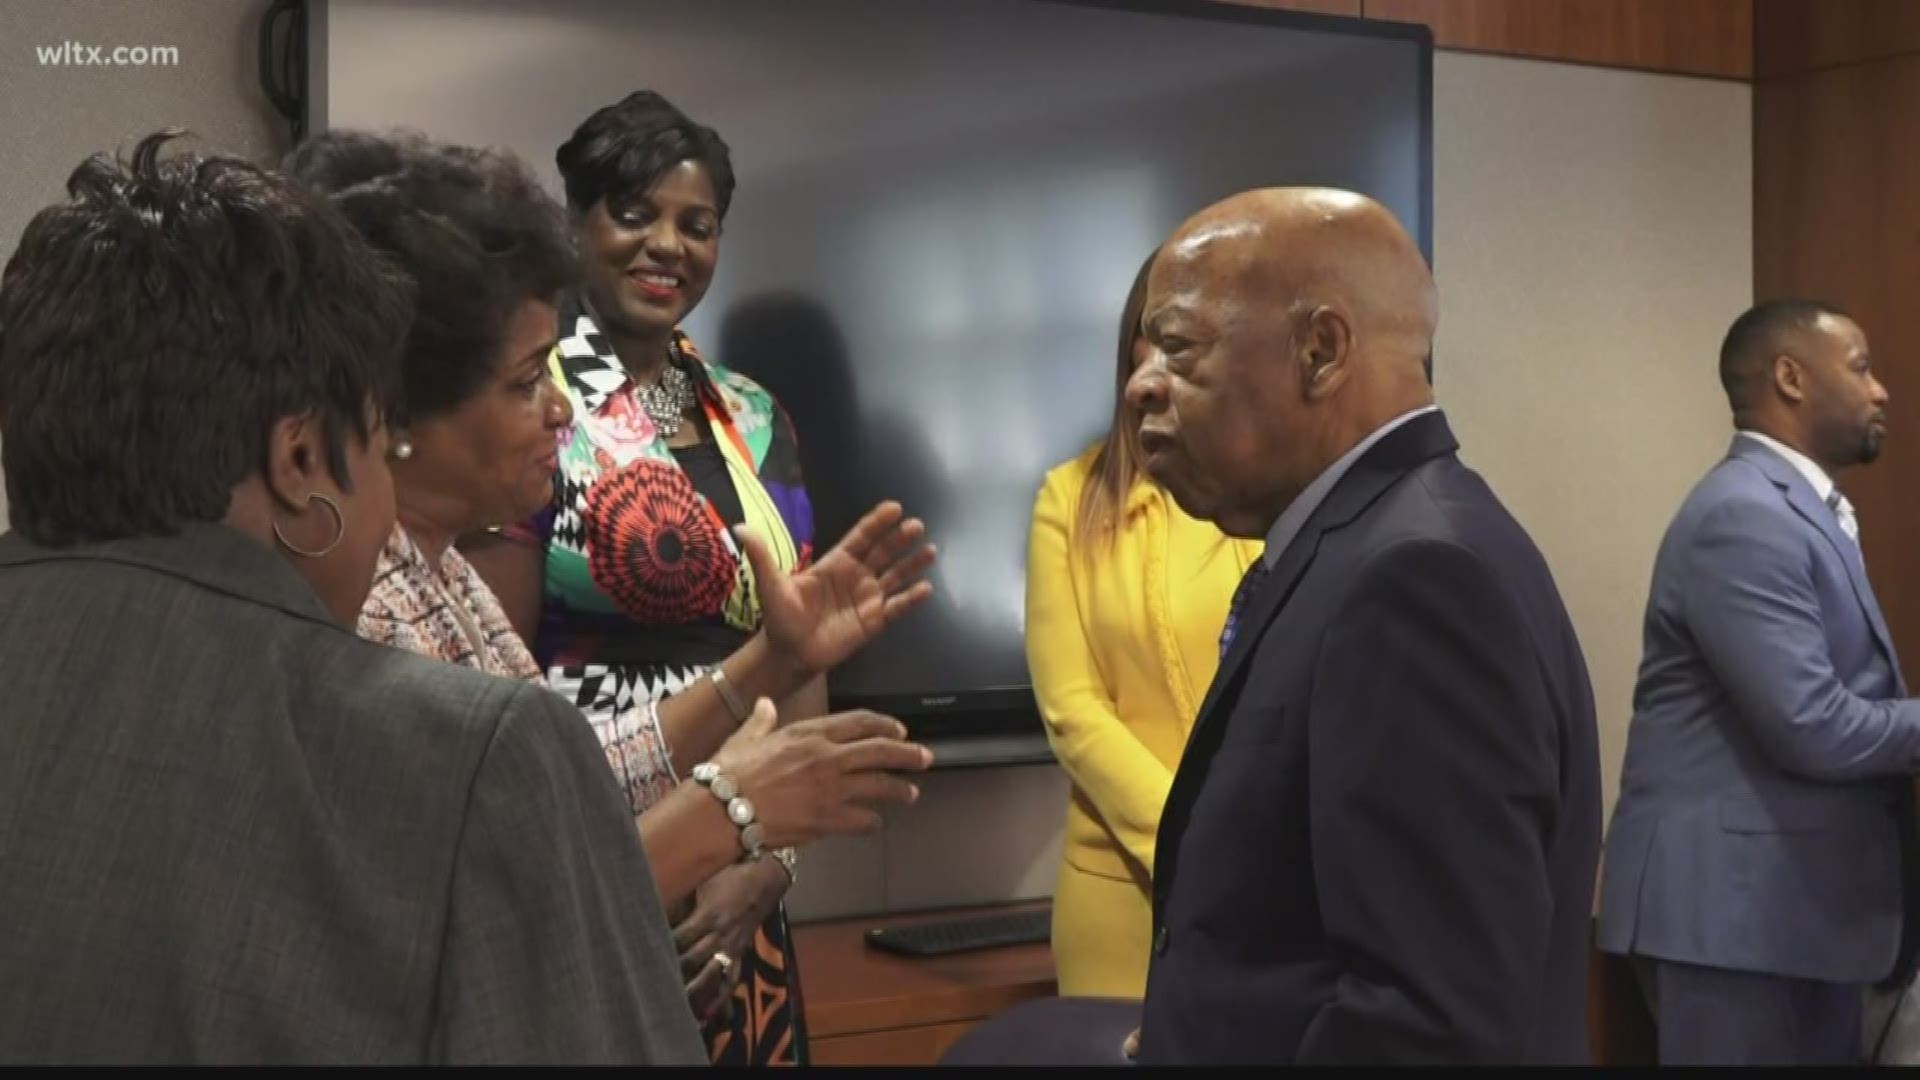 Georgia's 5th District Congressman, John Lewis, met with Benedict College students, faculty and alumni on Friday ahead of an alumni homecoming banquet.